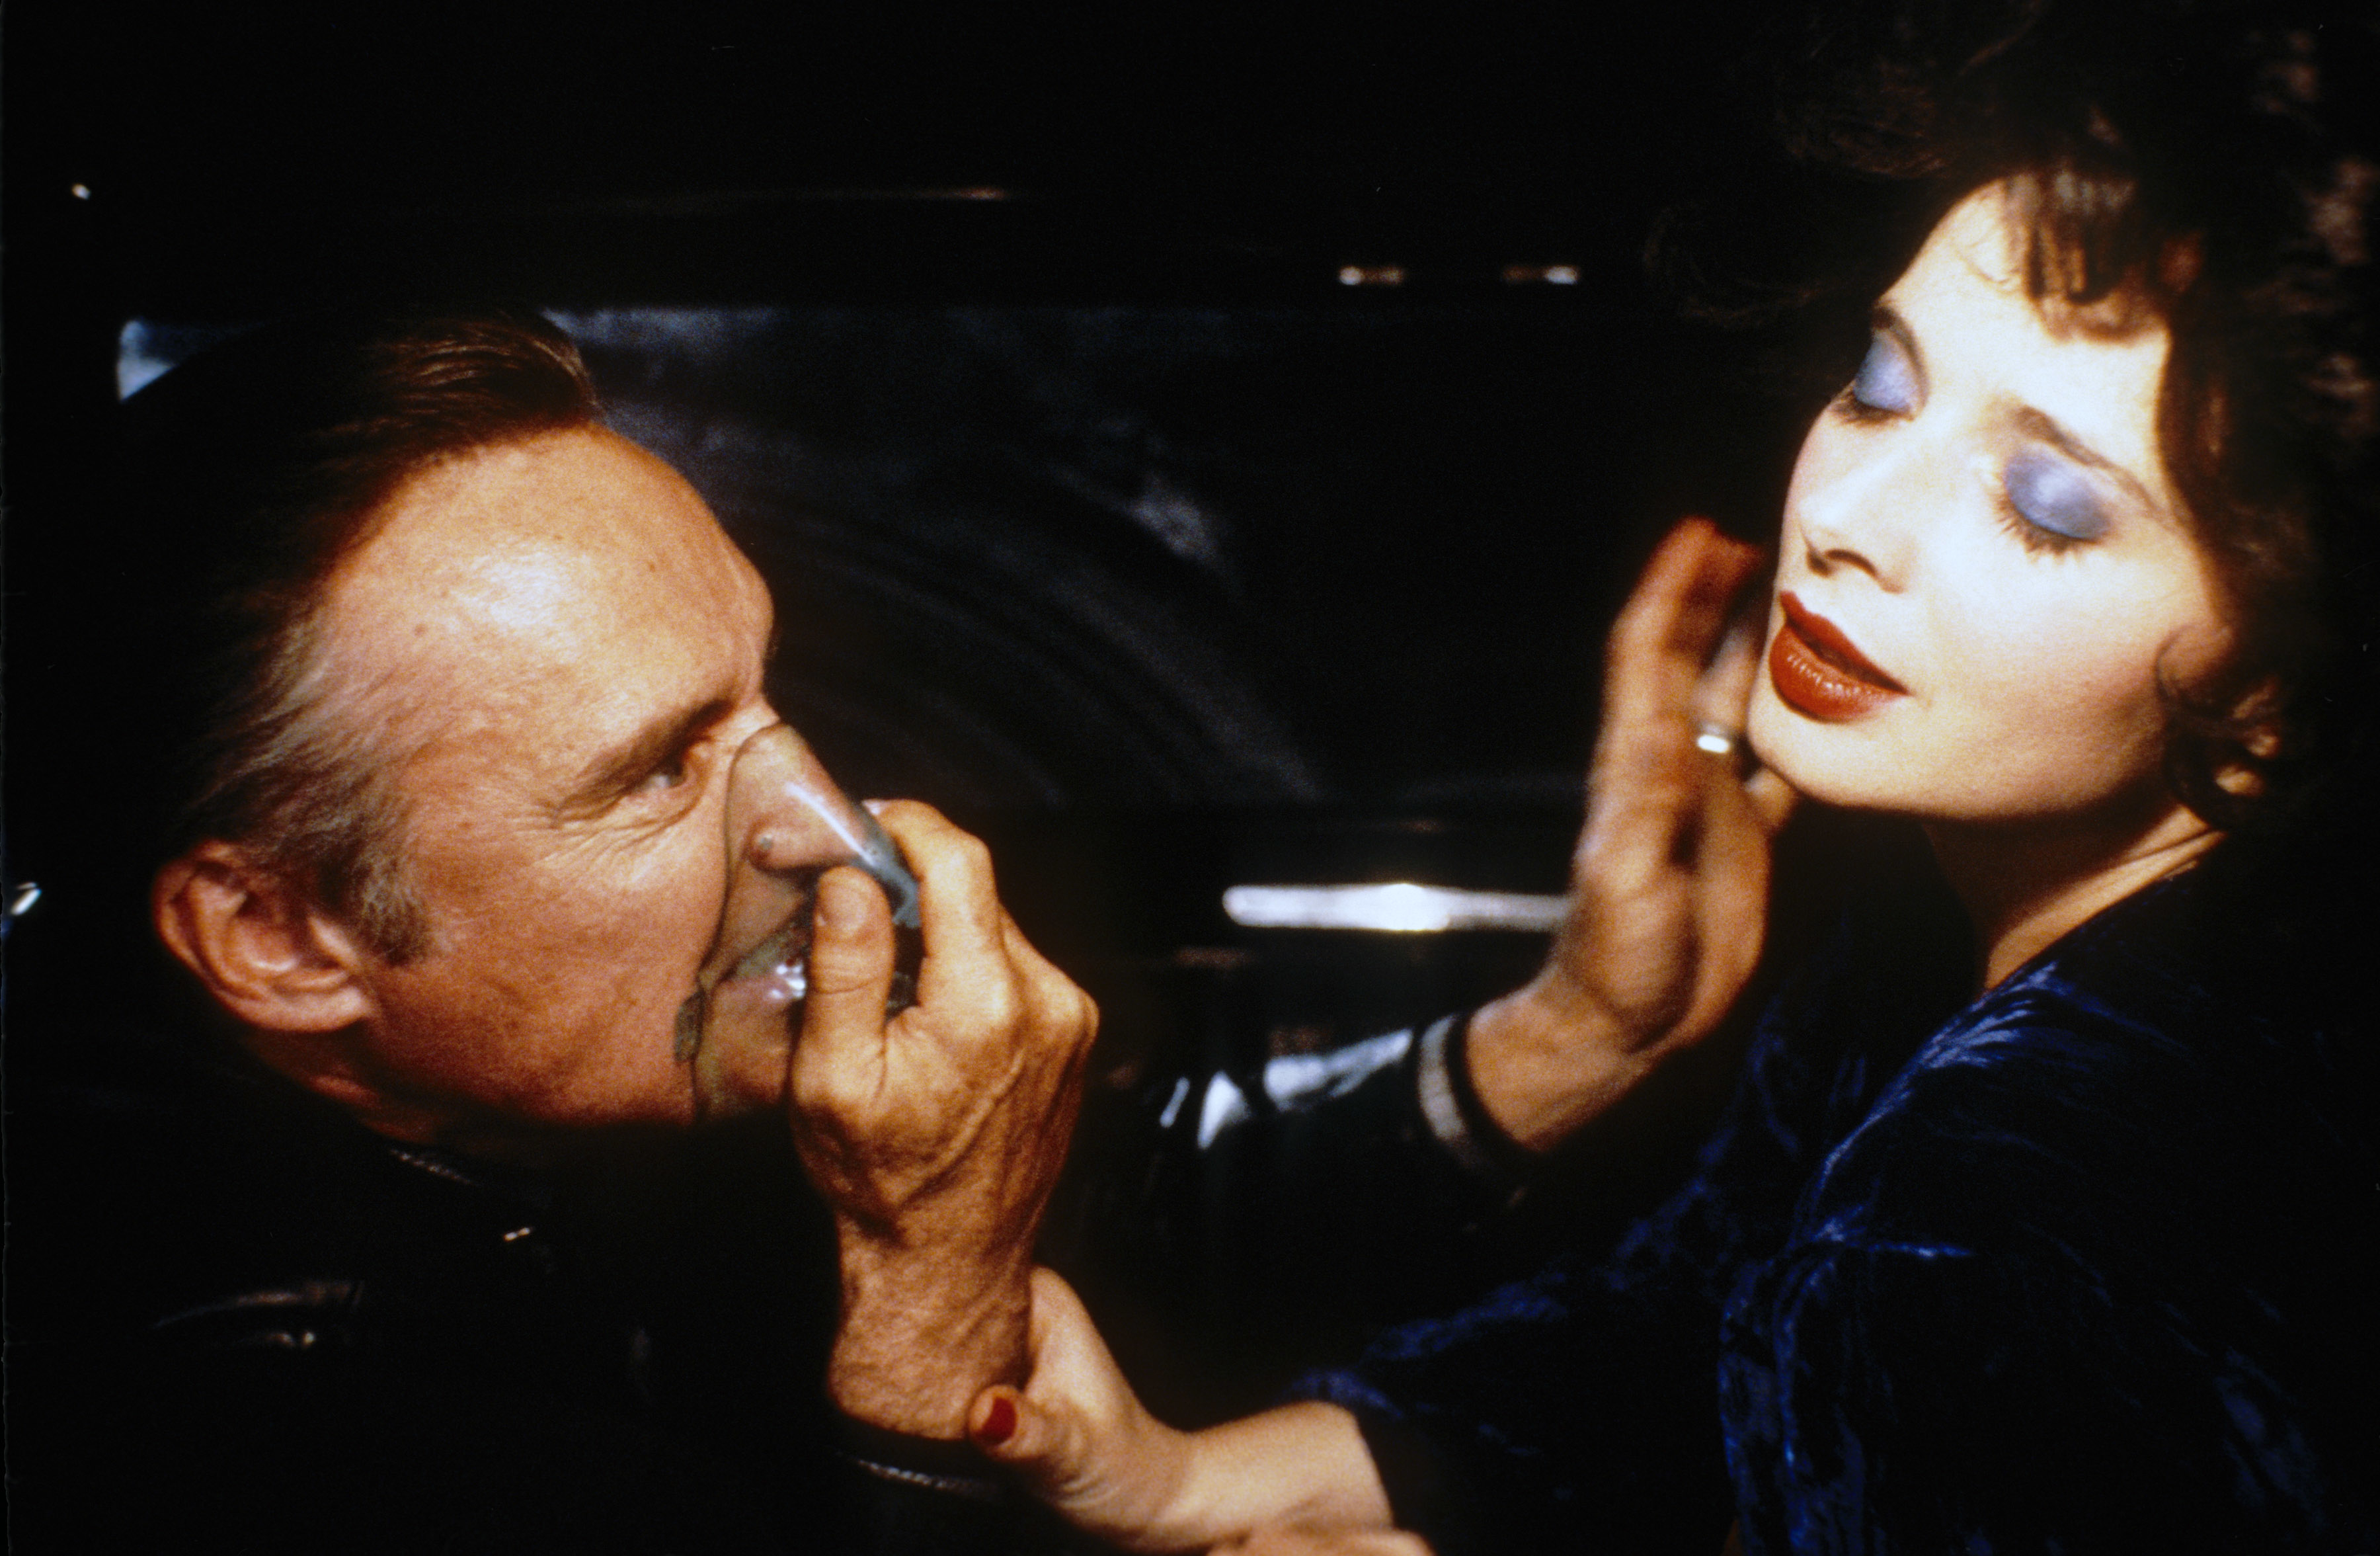 Dennis Hopper and Isabella Rossellini in an intense moment from a scene in a movie. Dennis holds his hand on his face; Isabella is reaching out, showing distress